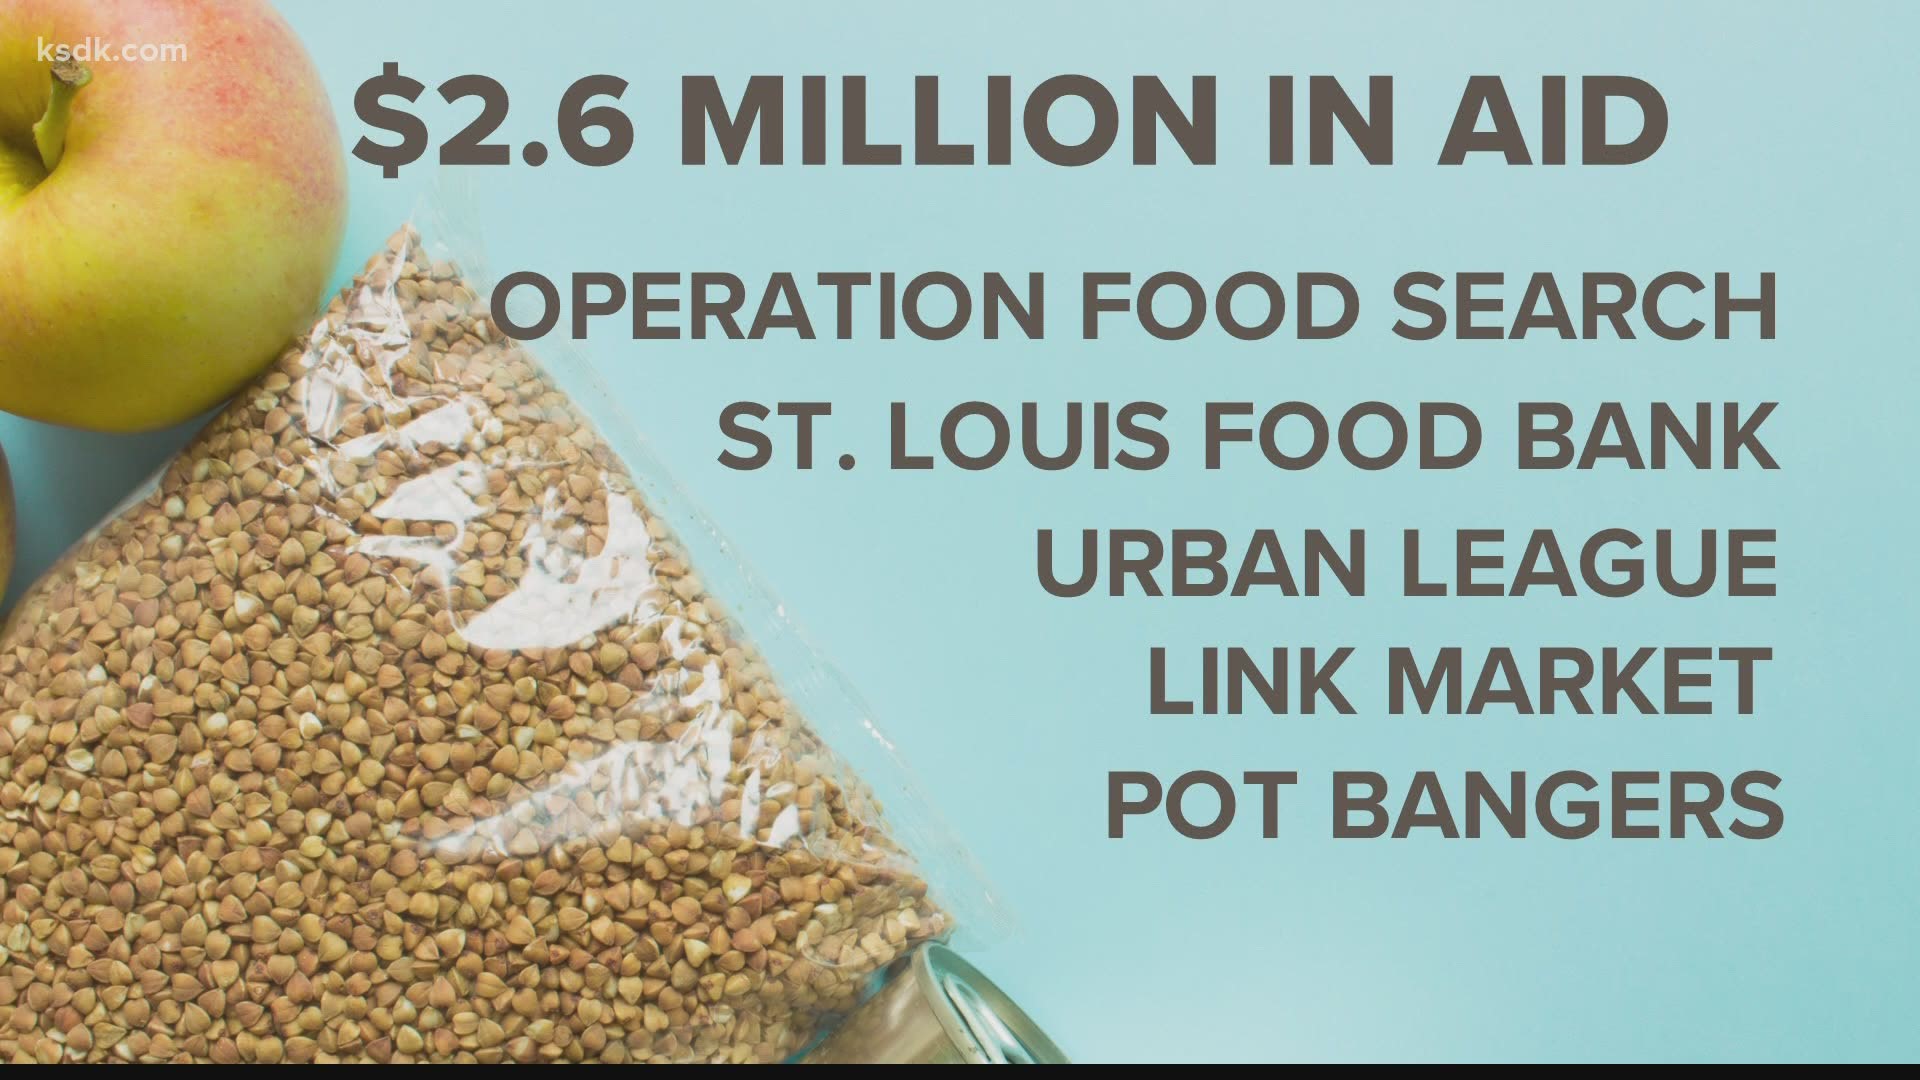 Five organizations will receive a total of $2.6 million to help feed people in the community